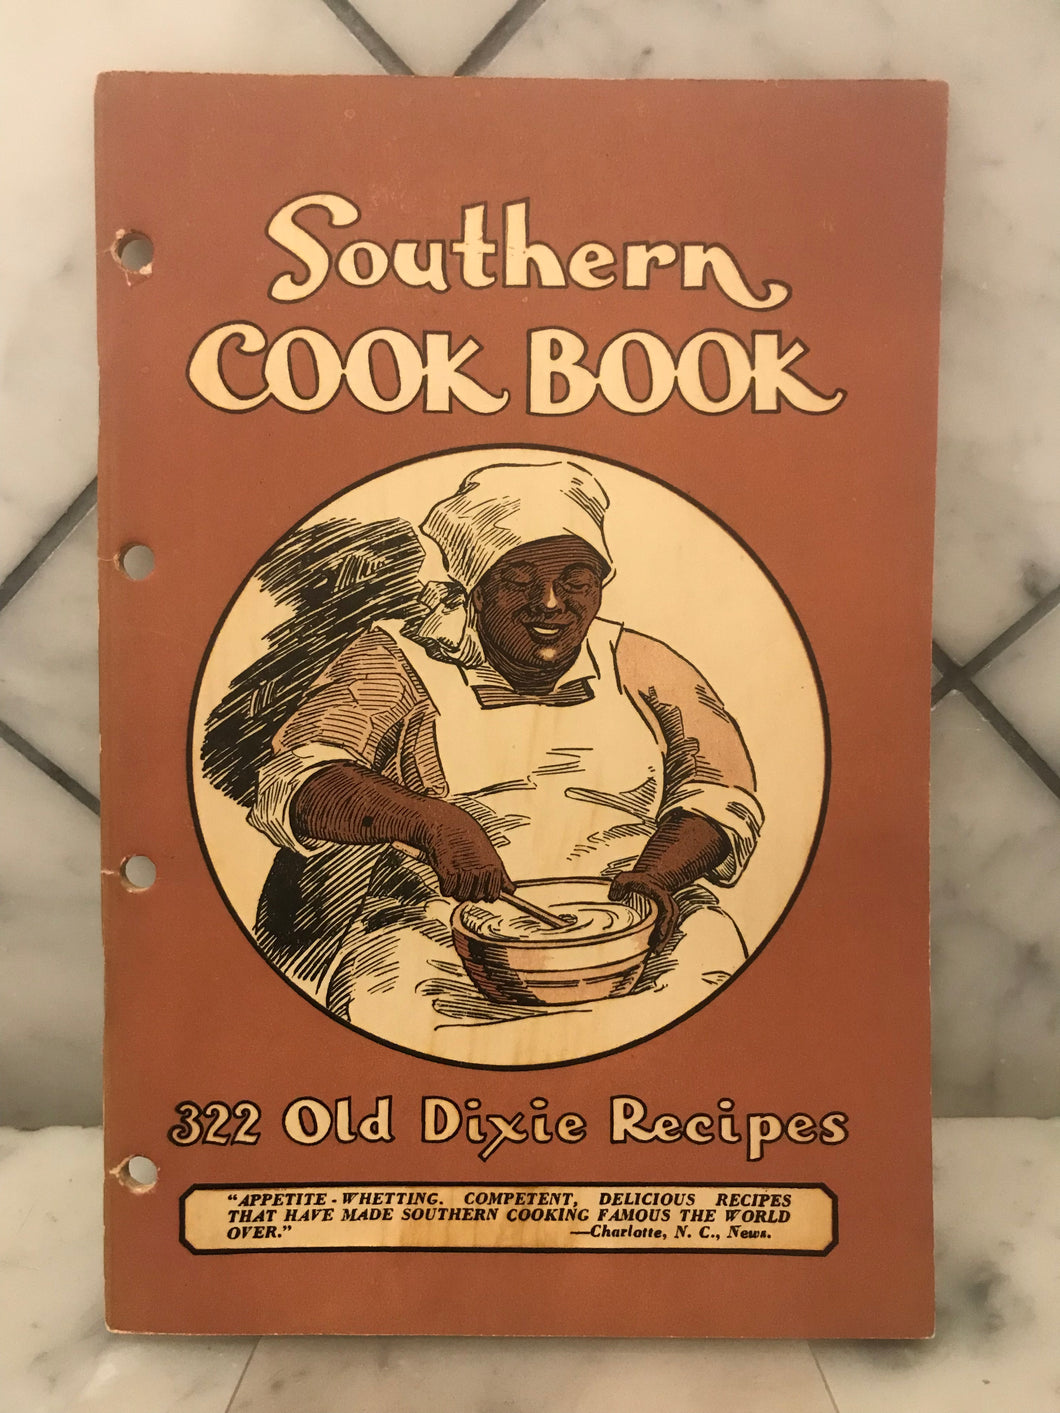 Southern Cook Book, 322 Old Dixie Recipes